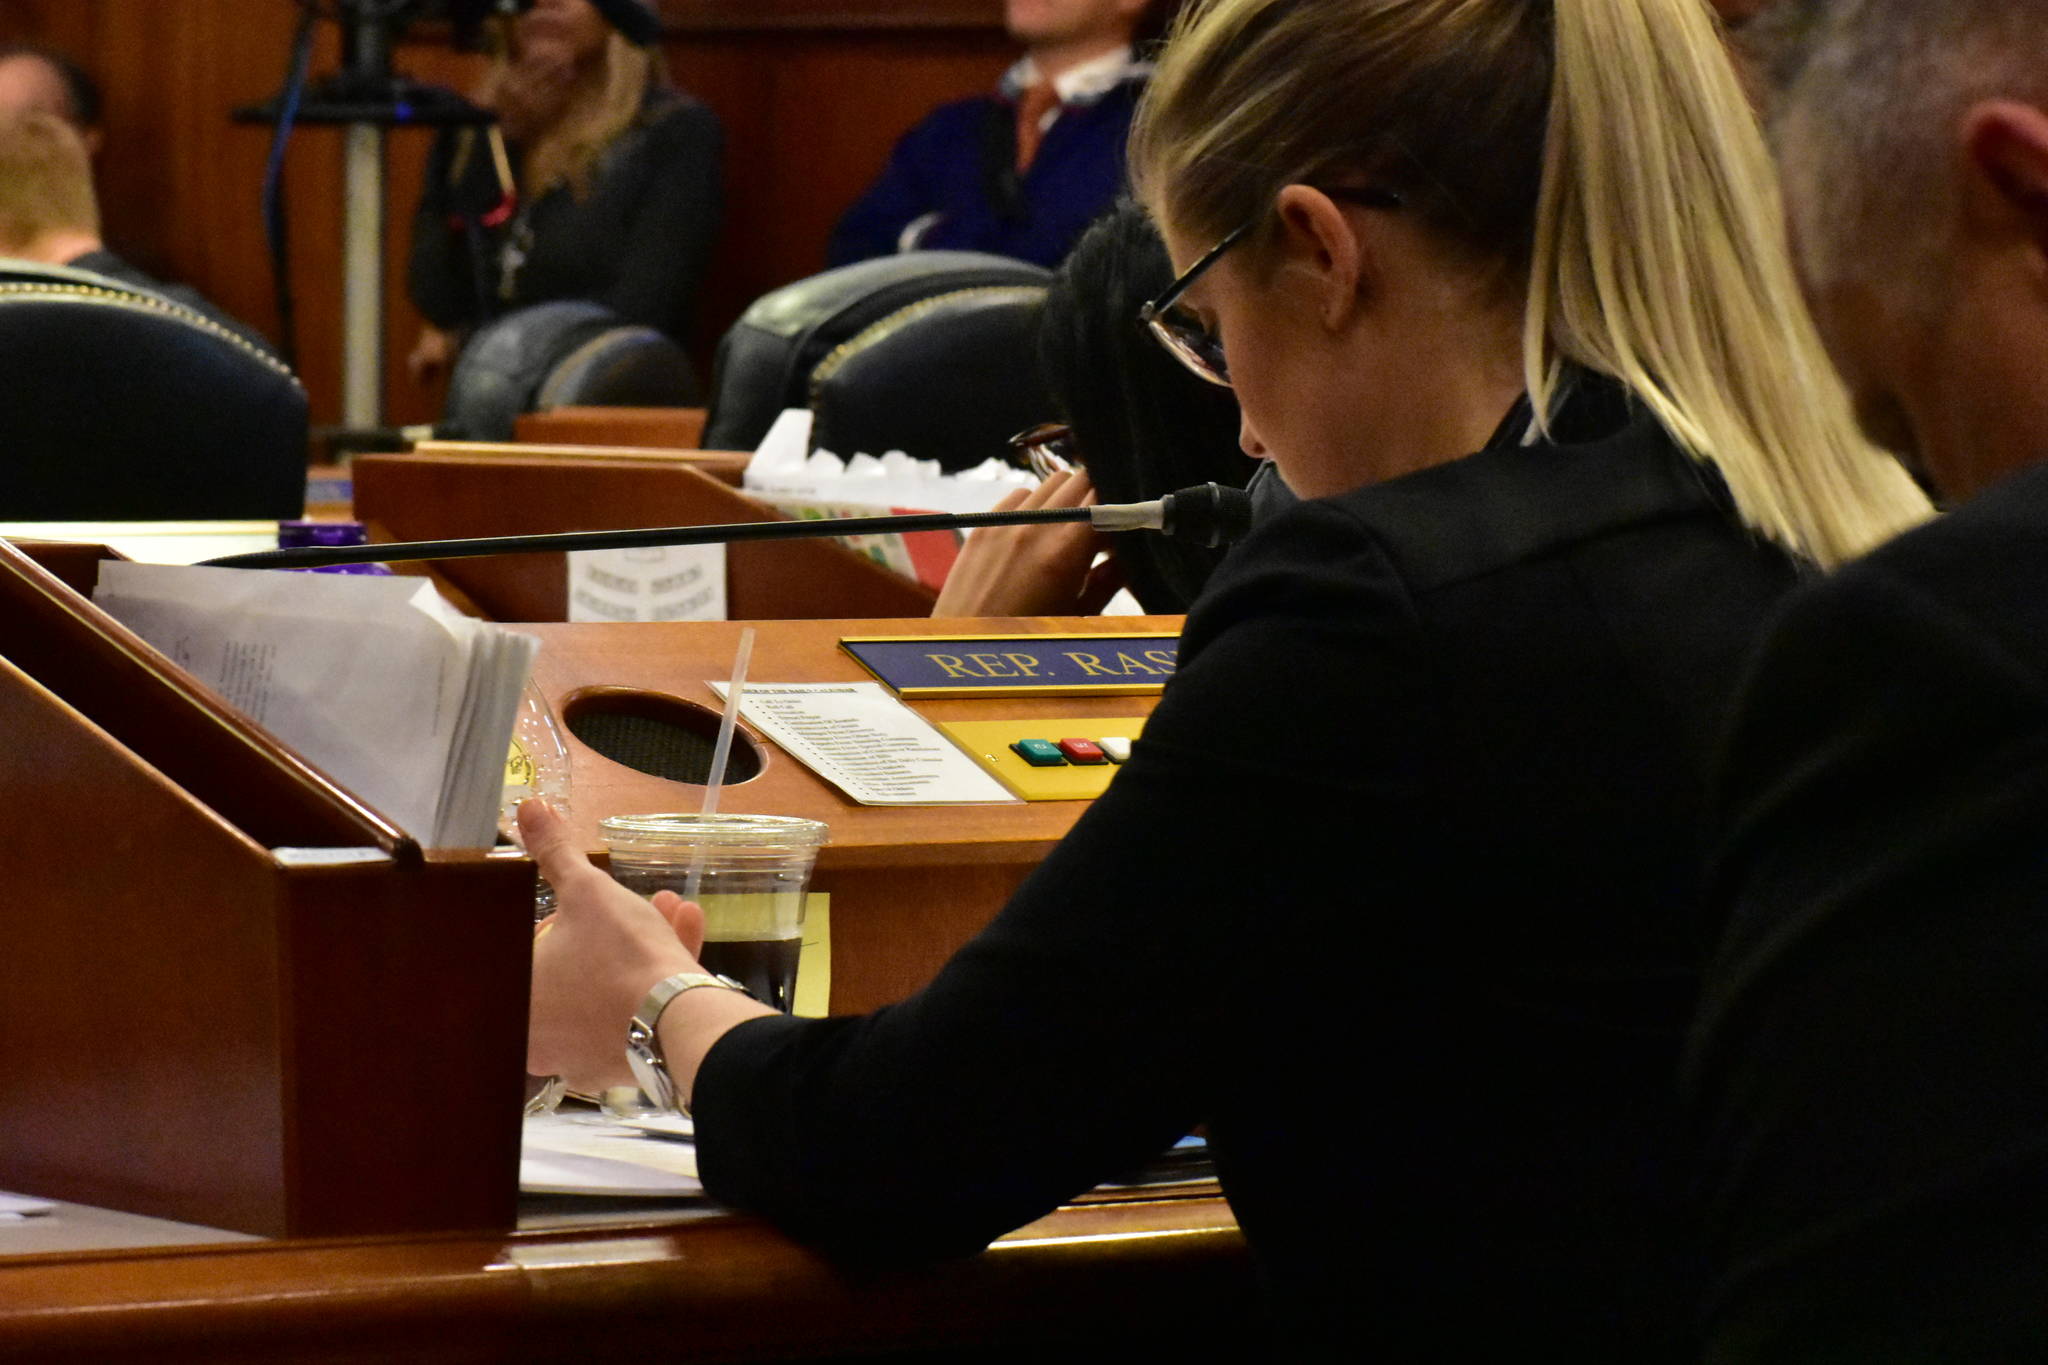 Rep. Sara Rasmussen, R-Anchorage, plays with a stress toy during the third hour of the joint session on Friday, Jan. 24, 2020. (Peter Segall | Juneau Empire)